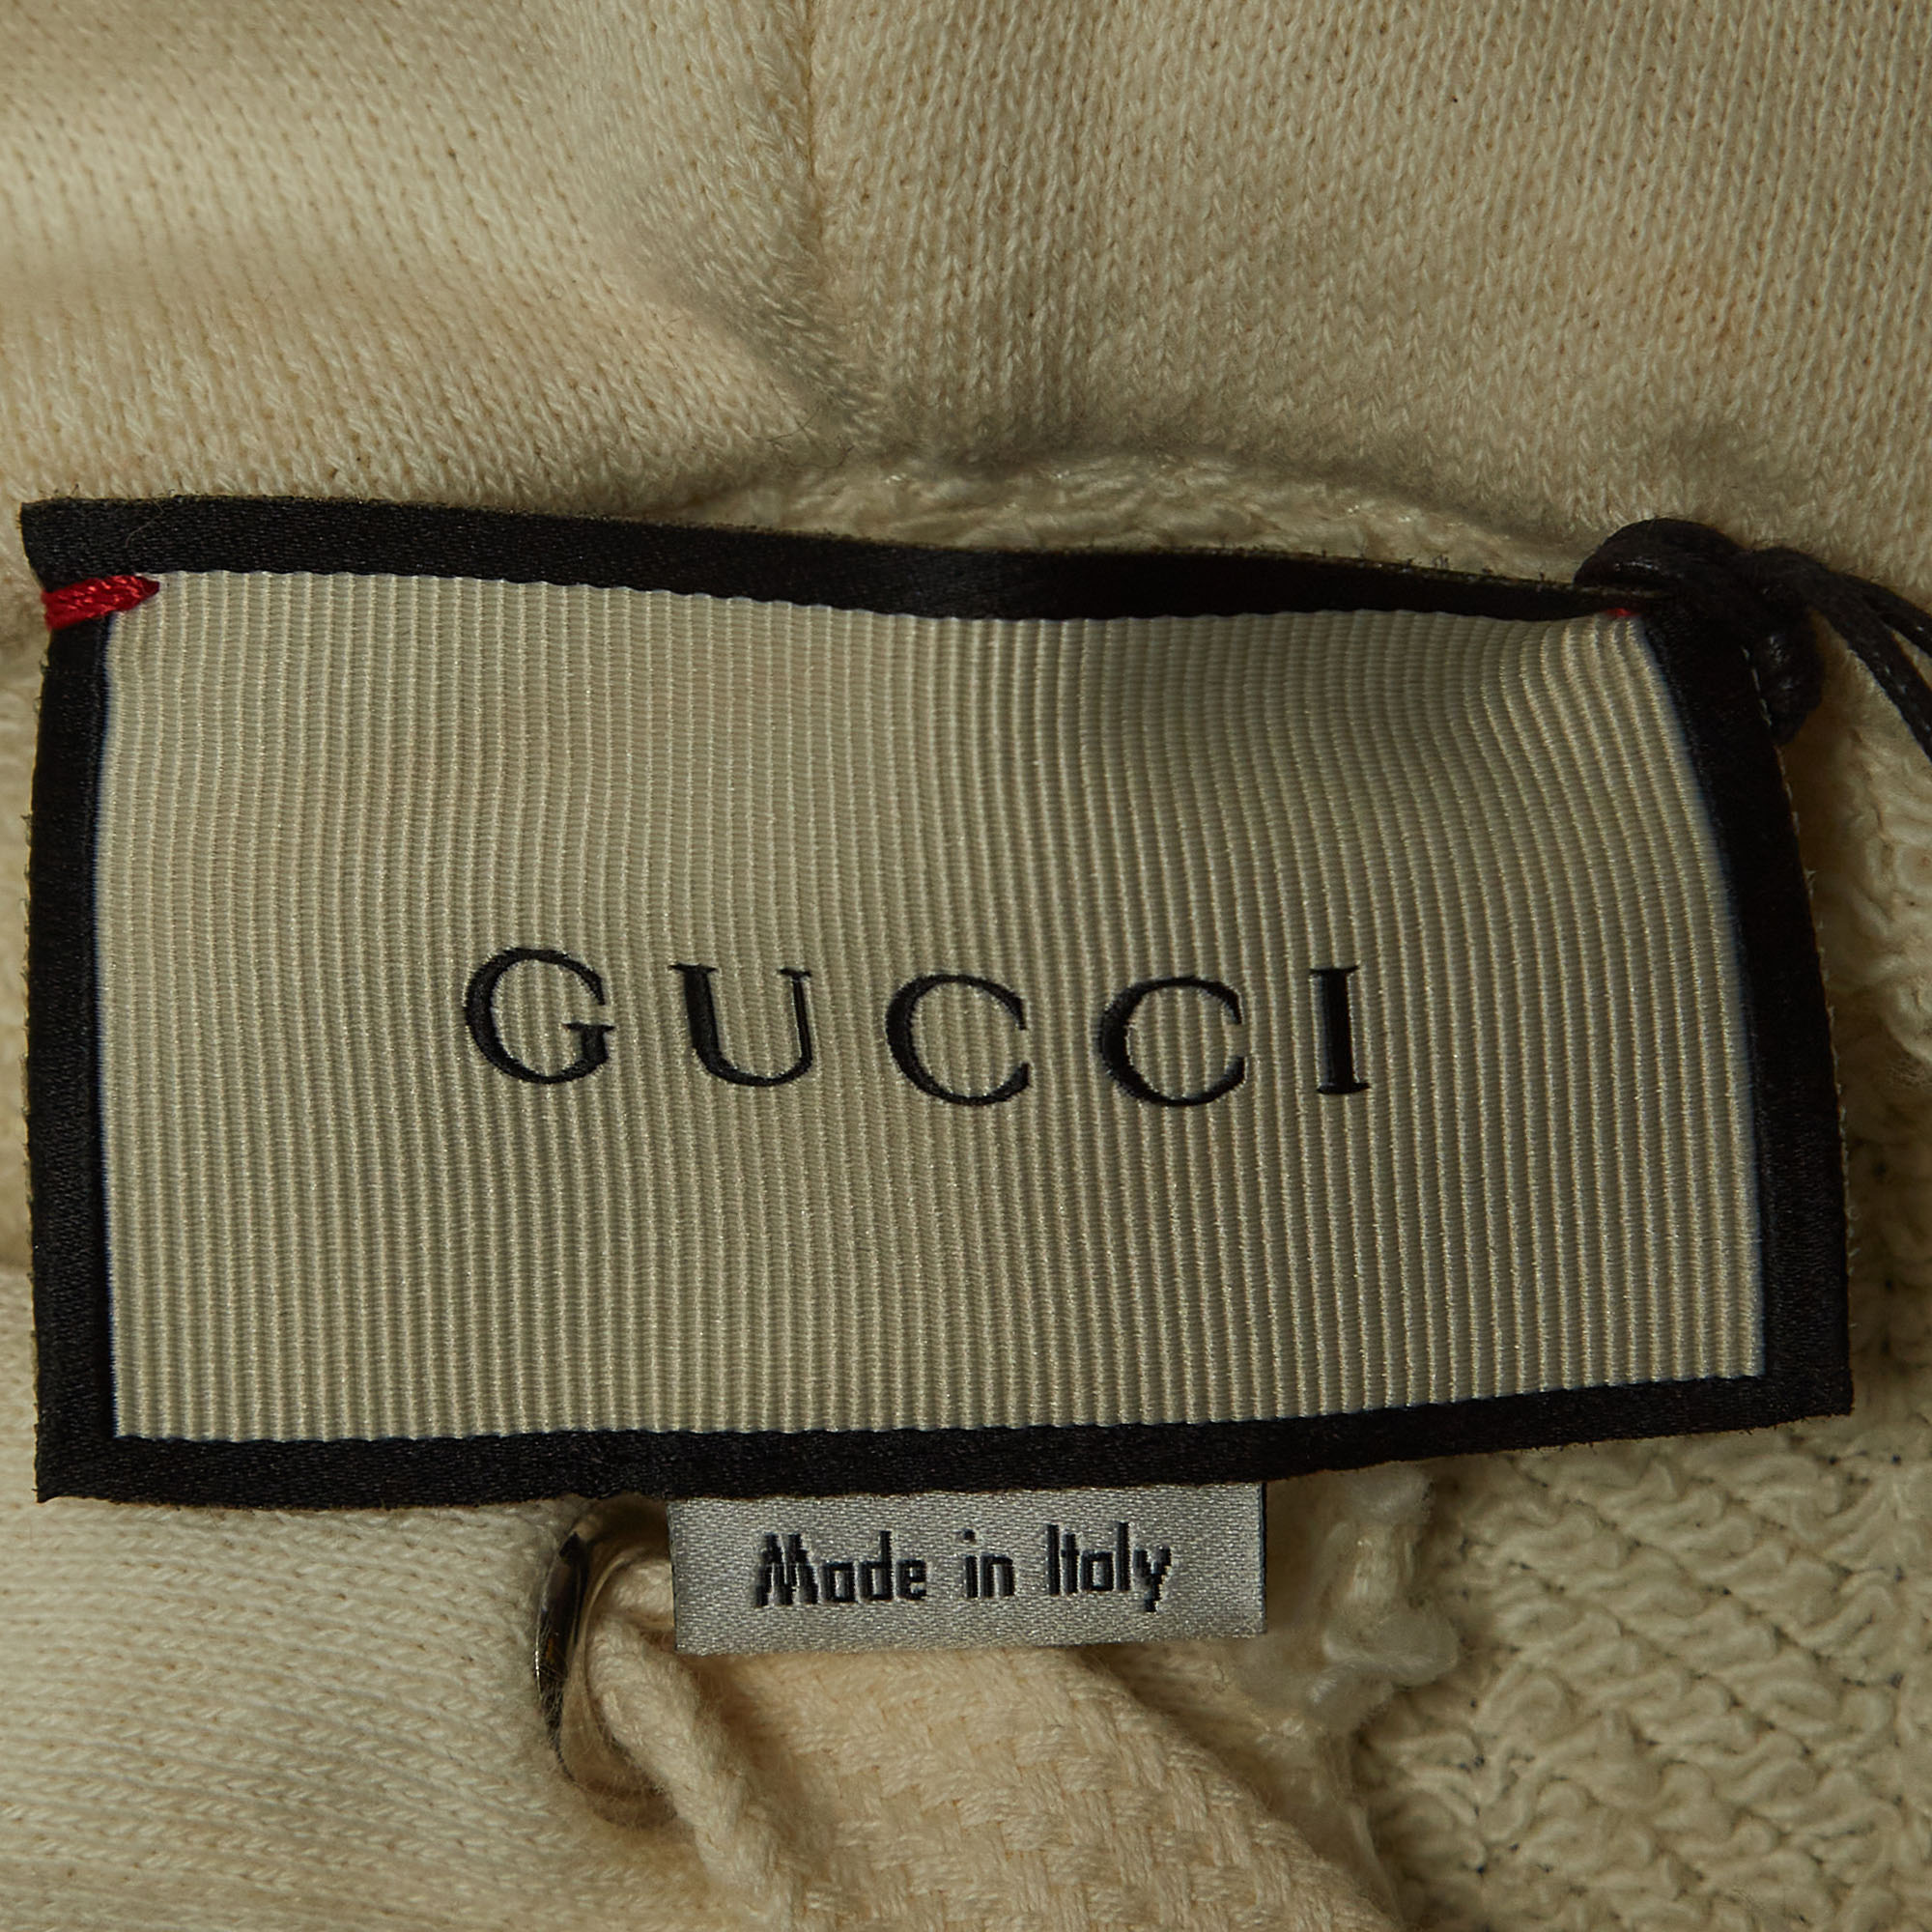 Gucci Cream Logo Print Embroidered Cotton Knit Hoodie XS